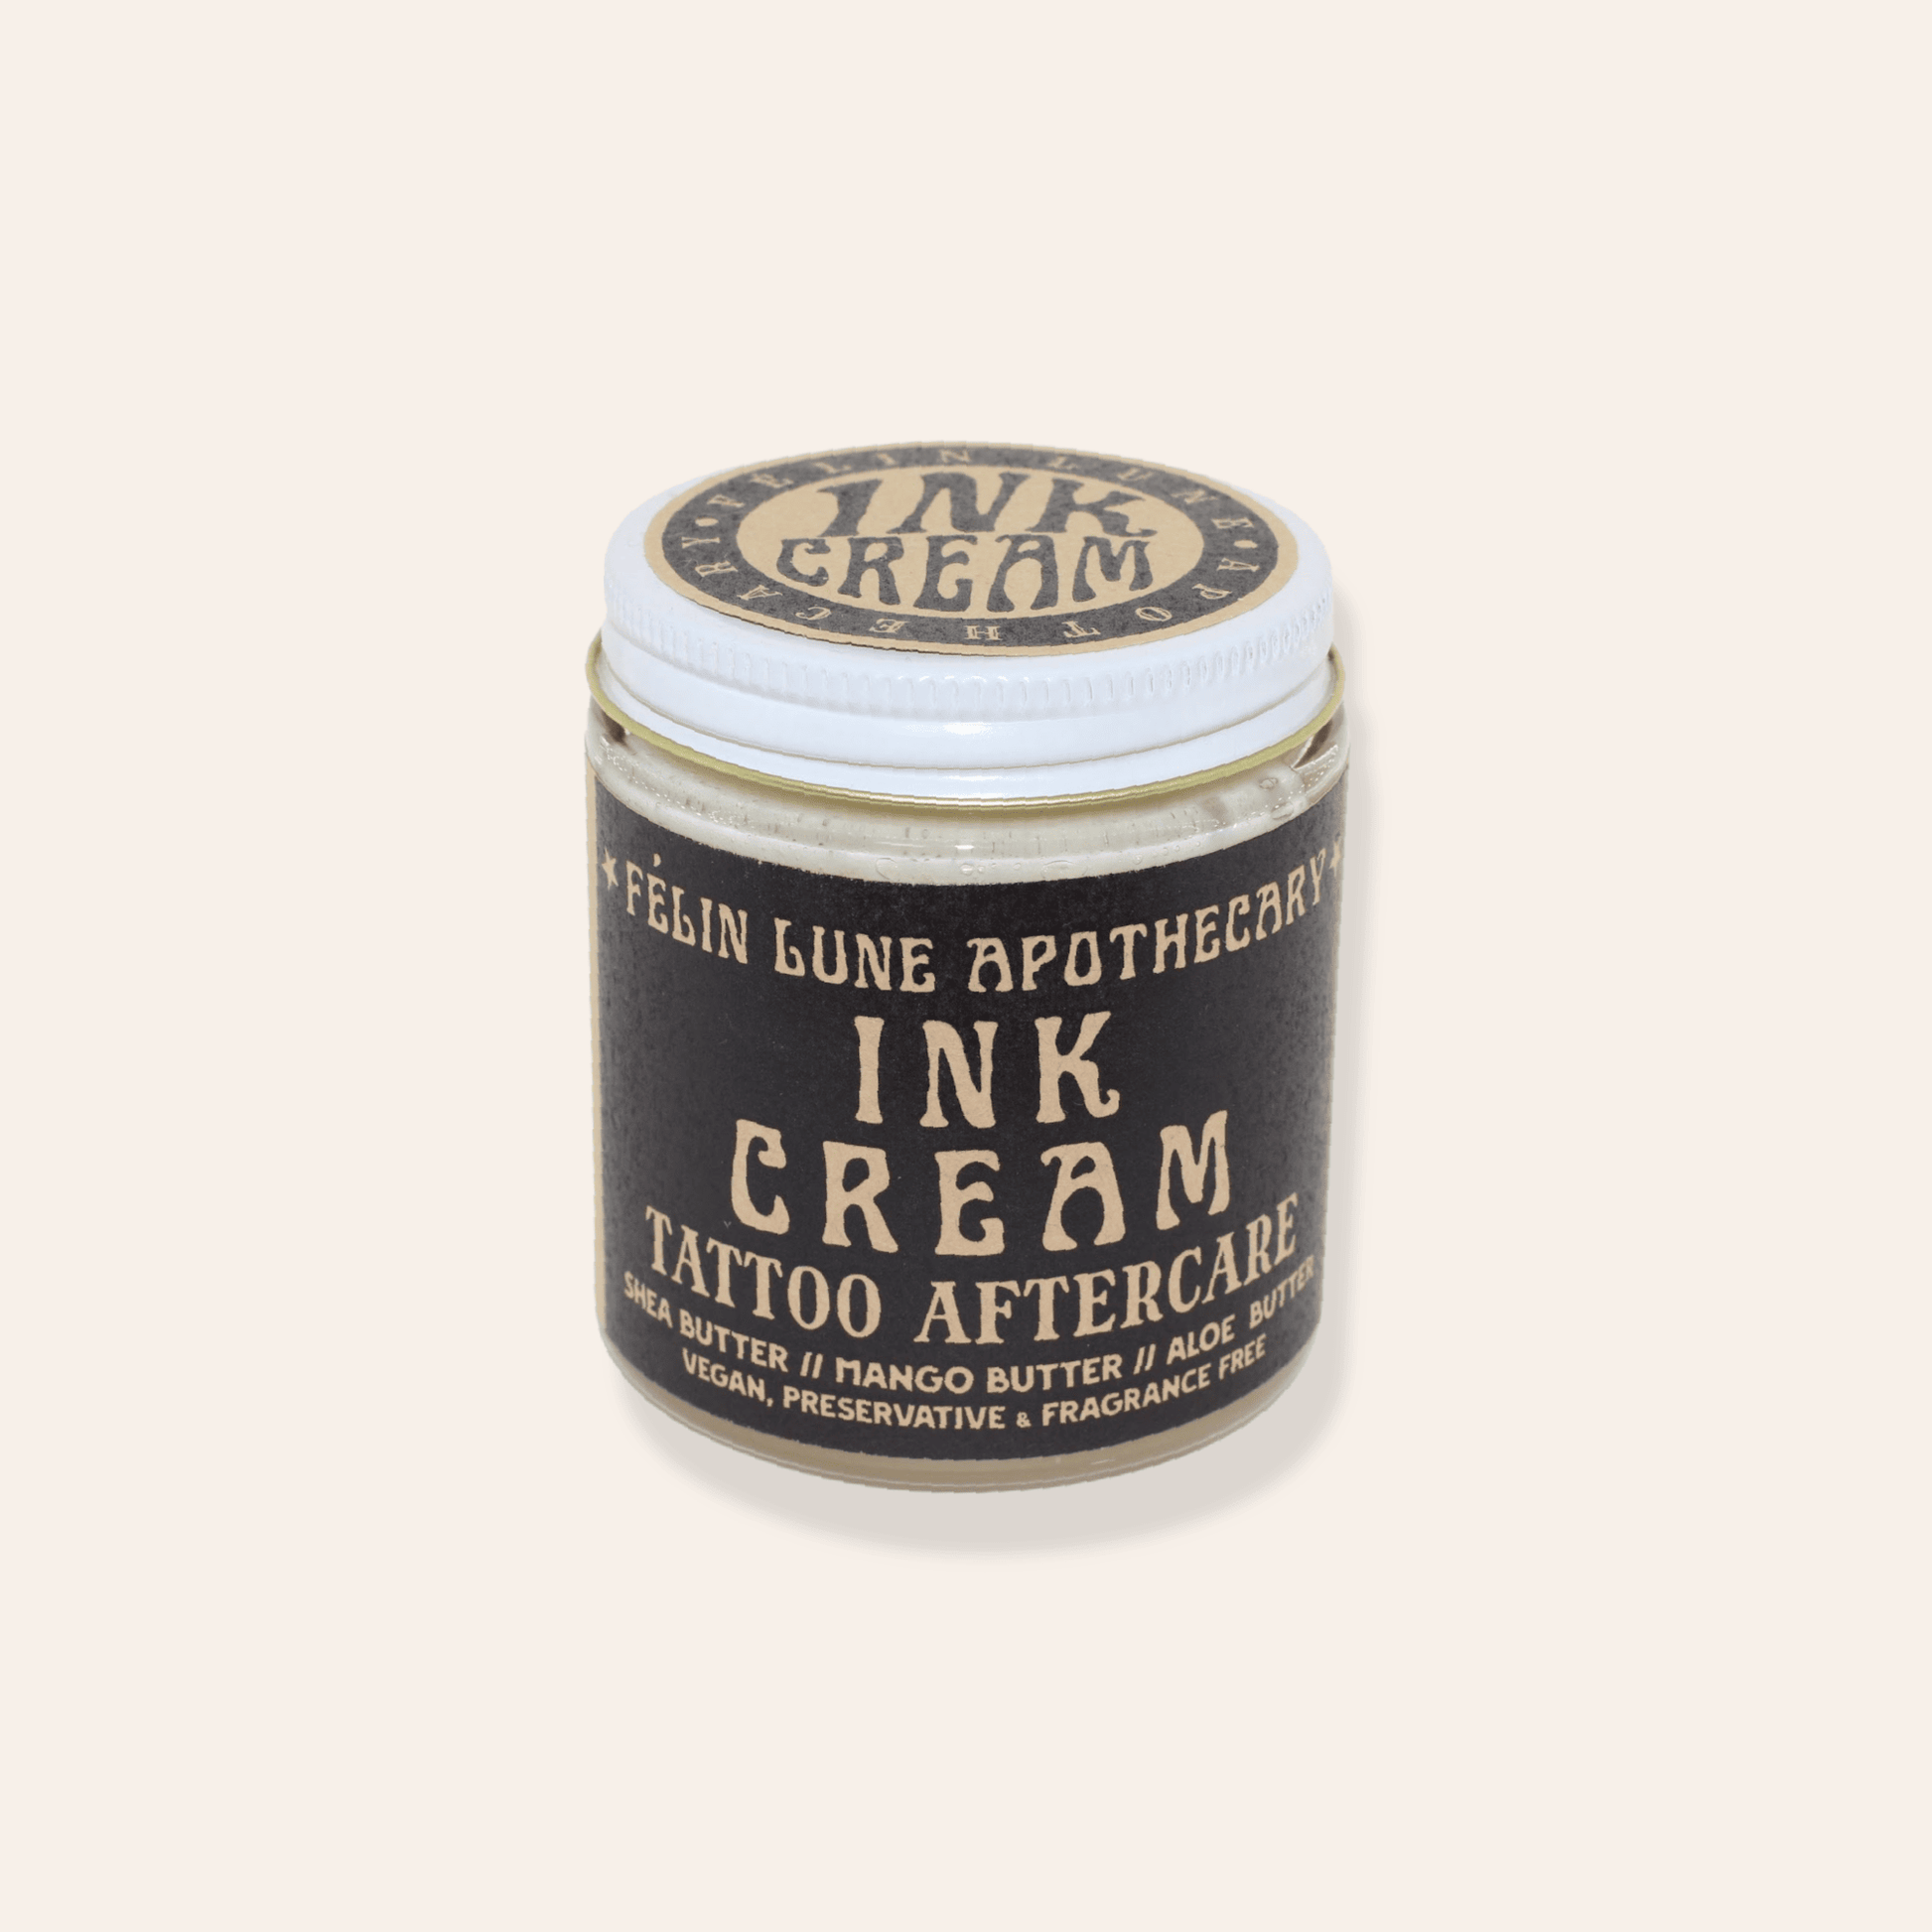 A jar of Ink Cream, a natural tattoo aftercare cream.